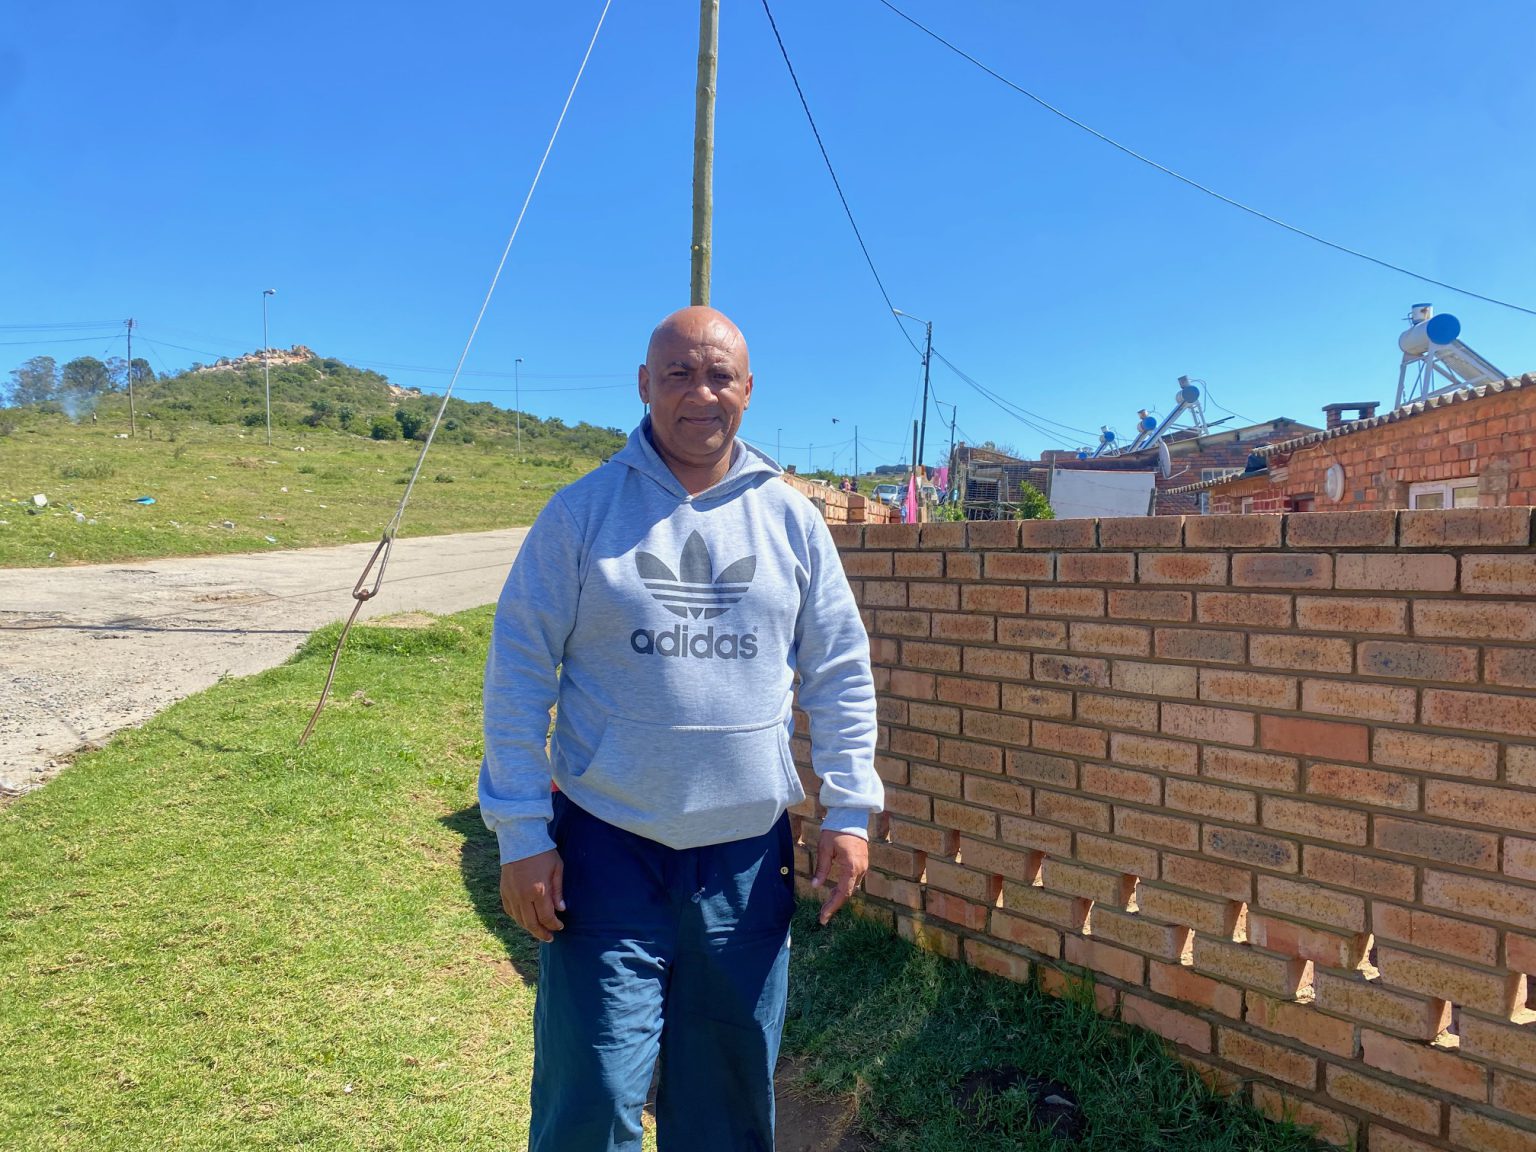 Ghost Town community activist Weston du Plessis has been challenging the municipality over the deceased debt issue for 15 years. Photo: Selenathi Botha